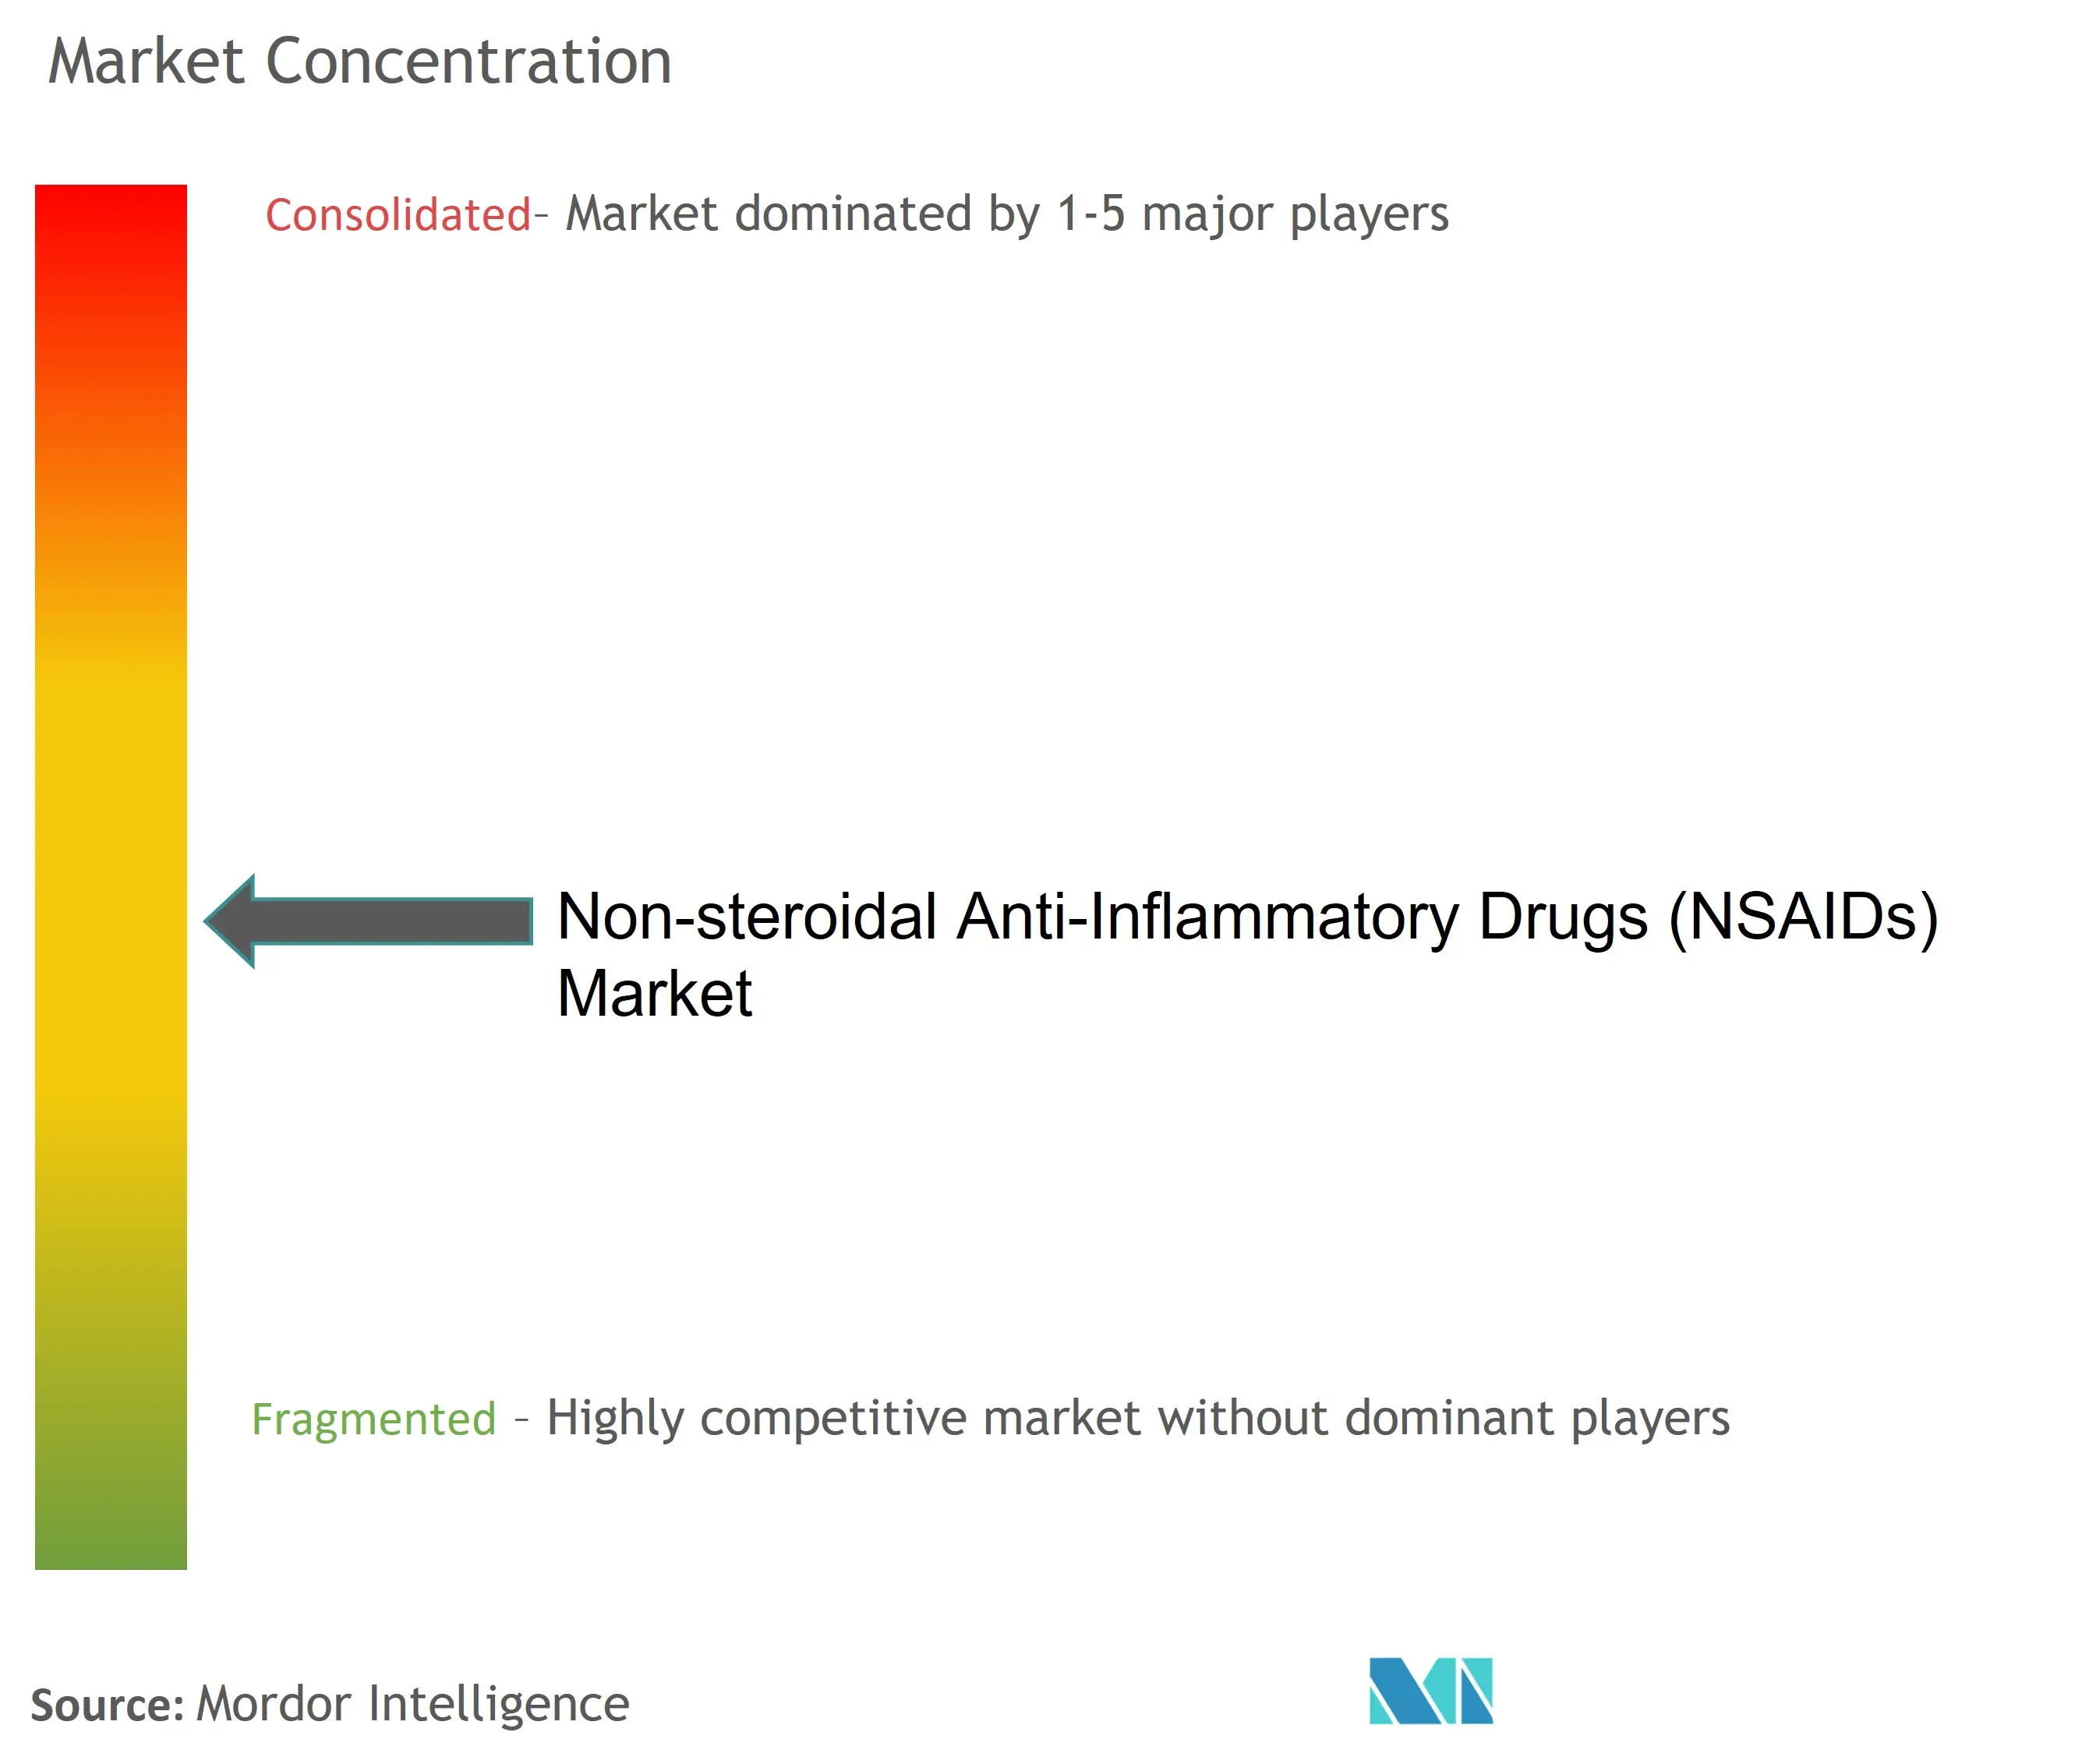 Non-steroidal Anti-Inflammatory Drugs (NSAIDs) Market Concentration